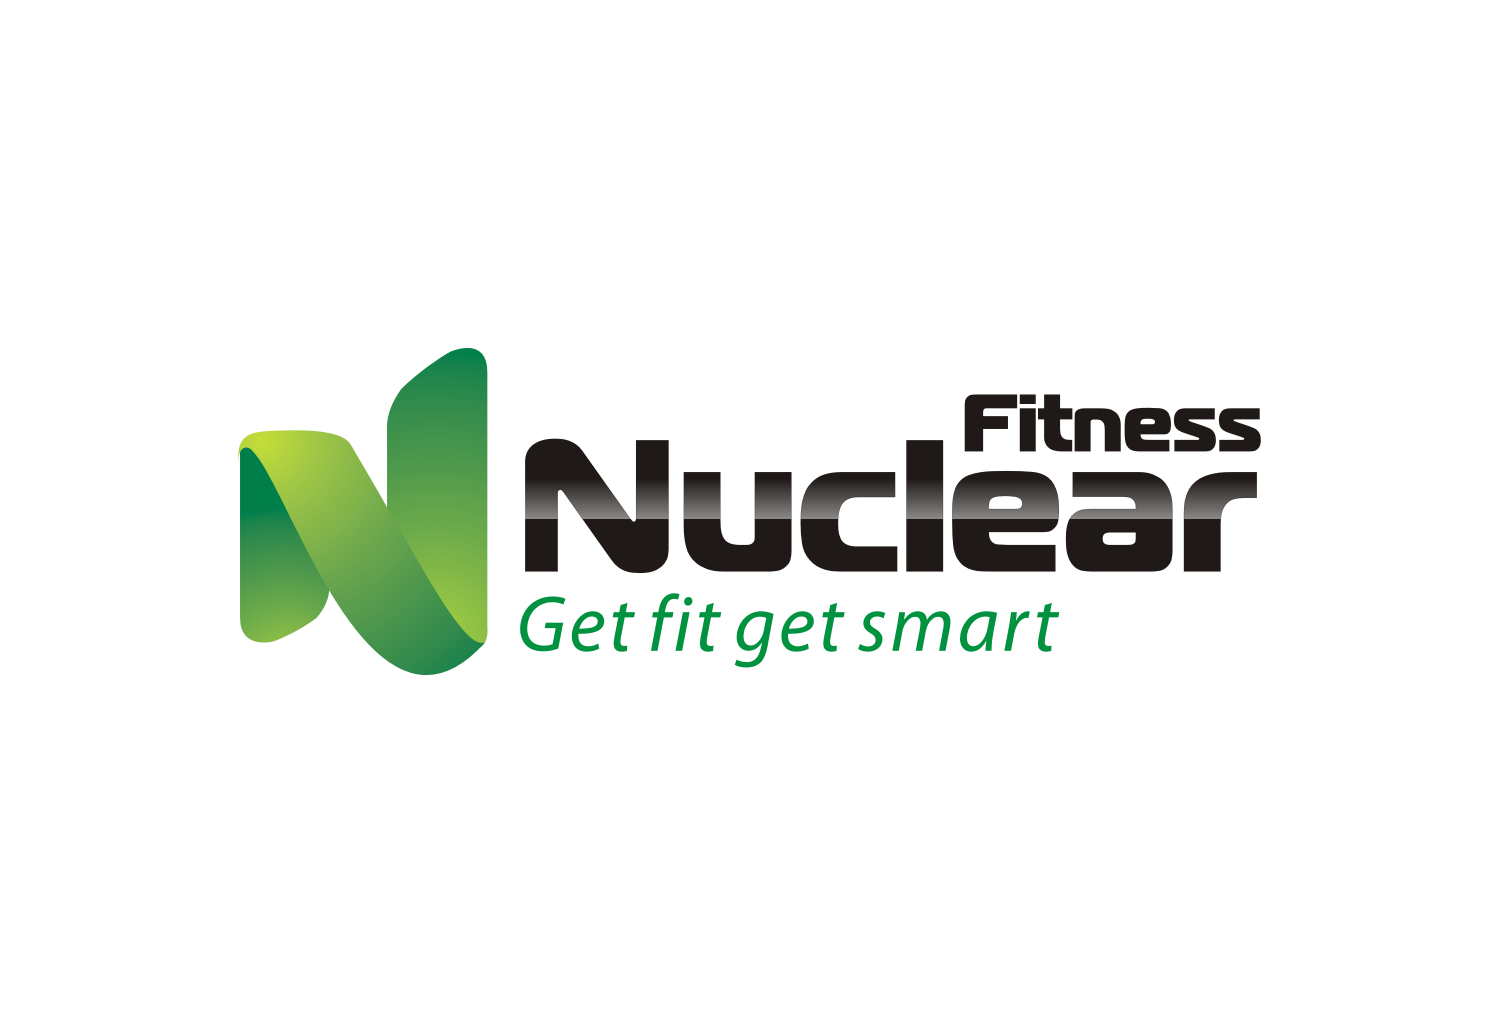 Nuclear Fitness logo